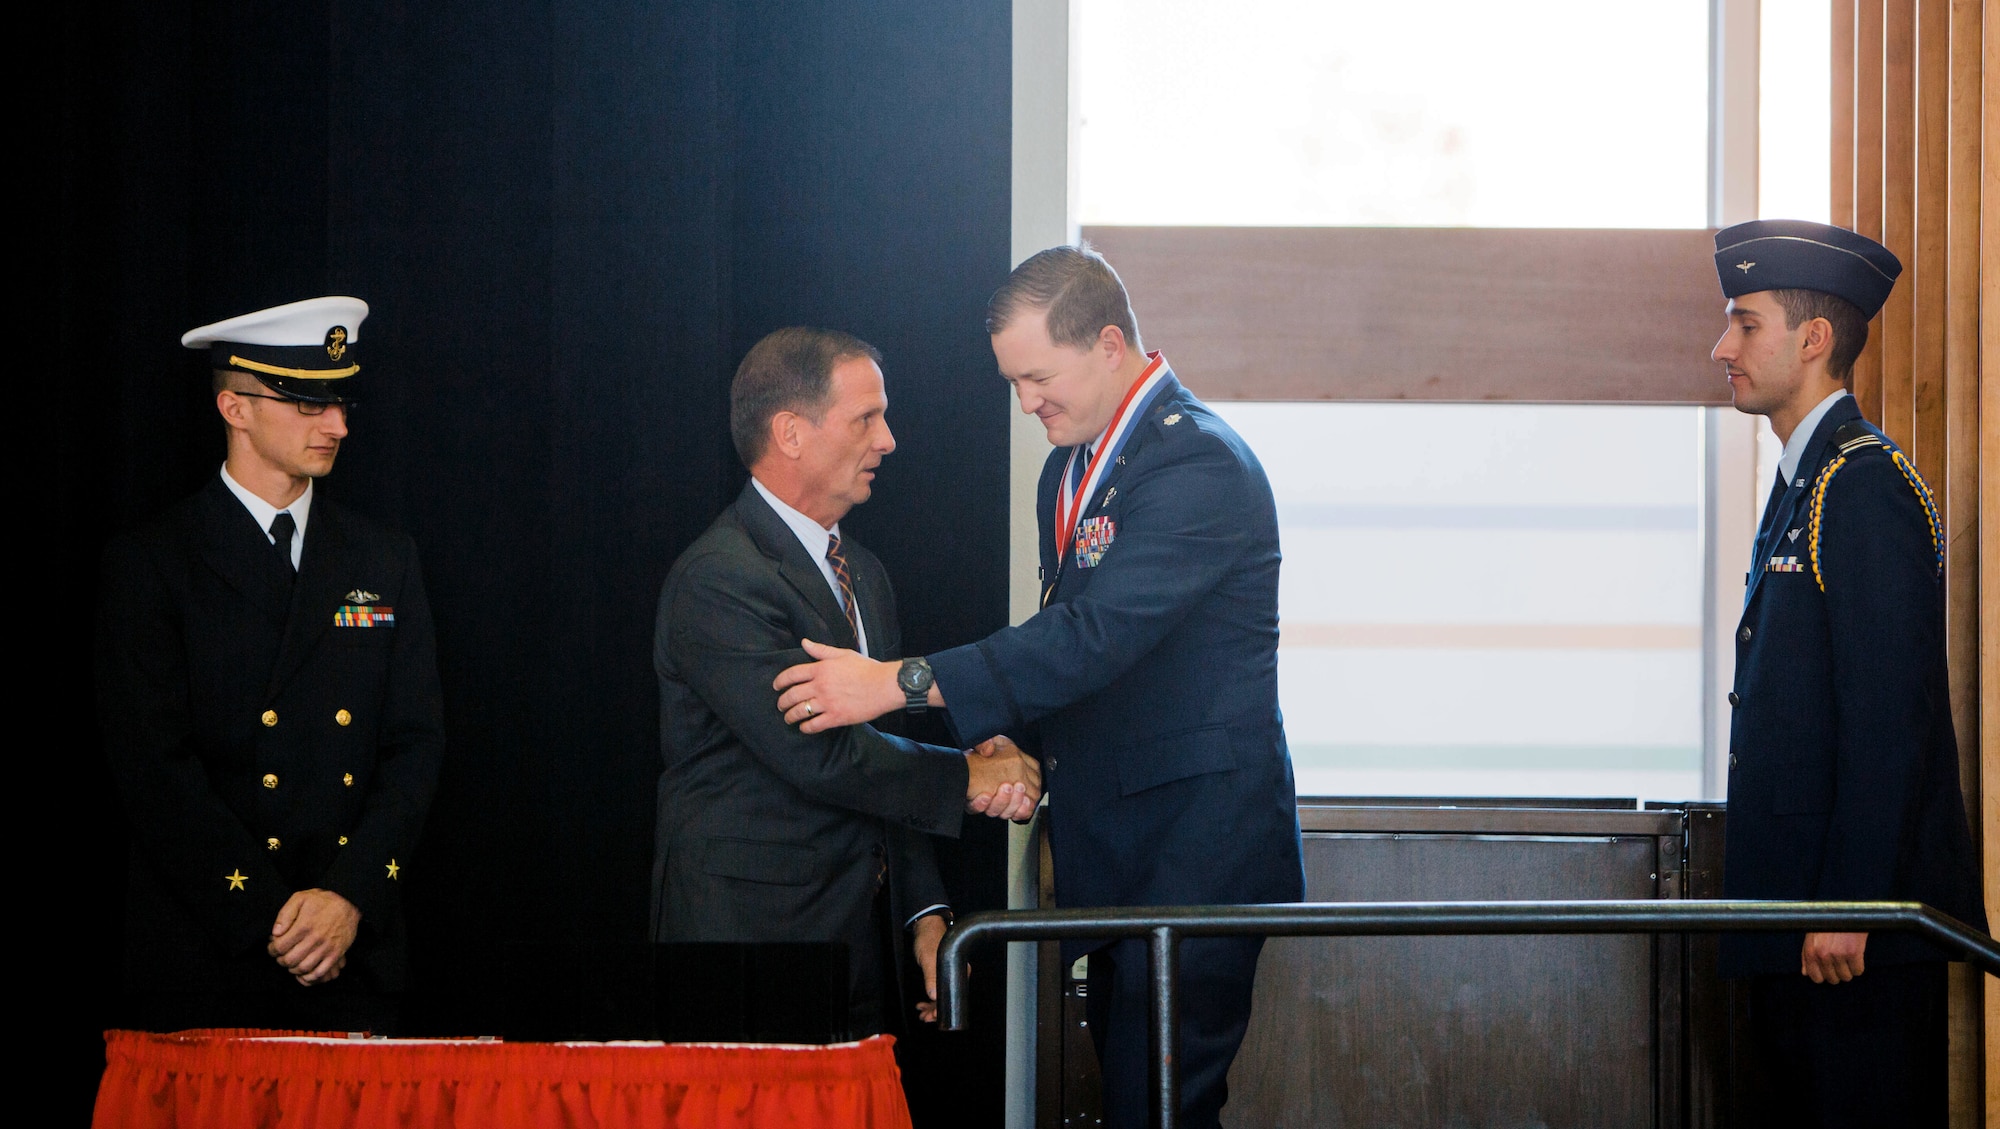 Lt. Col. TJ Eaton, reservist in the 419th Inspector General office, accepts a medal from Rep. Chris Stewart during a Veterans Day program Nov. 9 at the University of Utah.